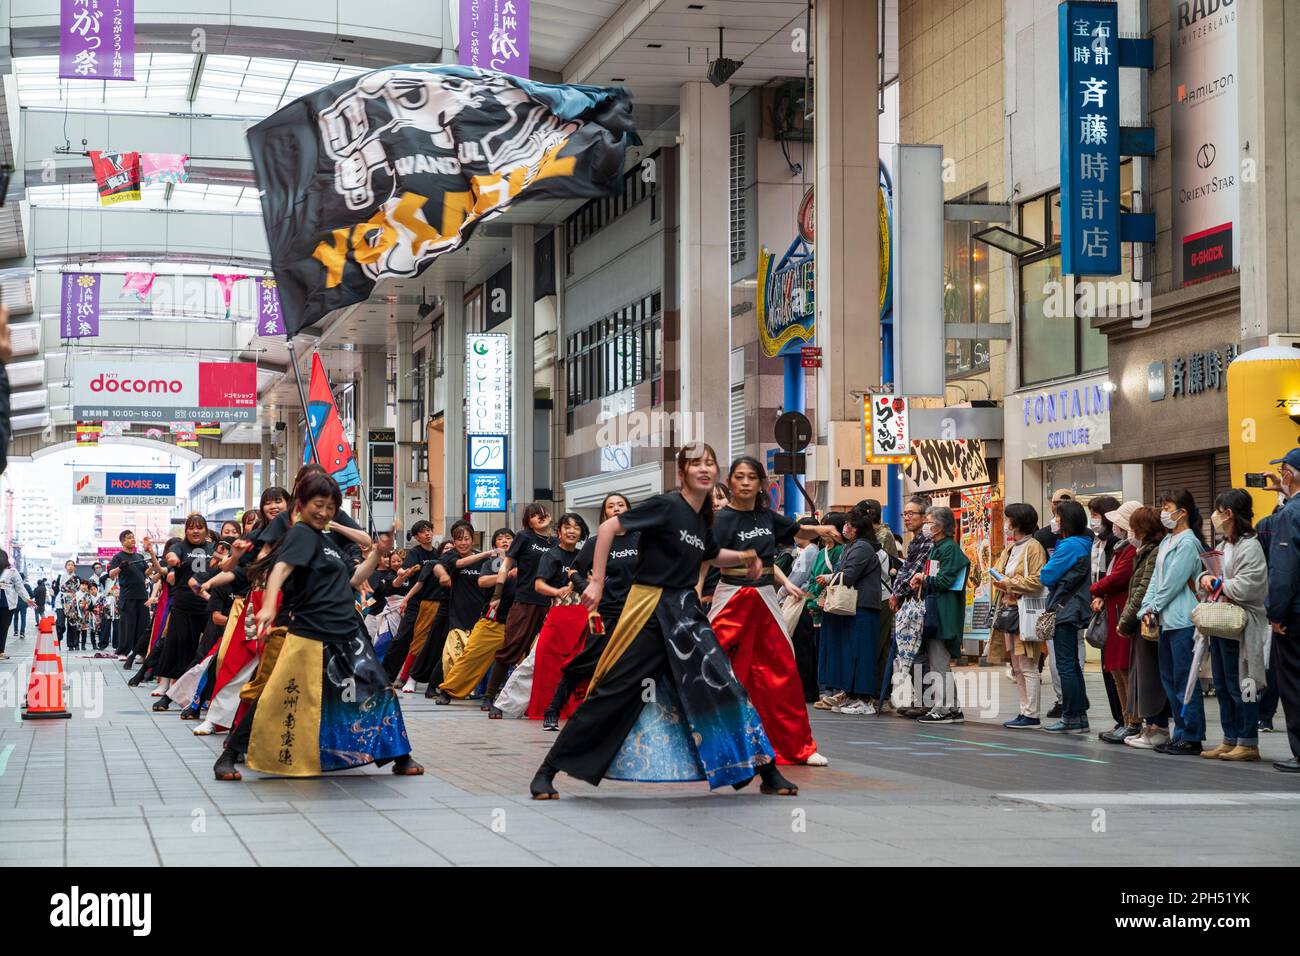 Team of young adult Japanese Yosakoi dancers wearing colourful yukata tunics while dancing in the middle of a covered shopping street, Sunroad Shinshigai, in Kumamoto during the annual springtime Kyusyu gassai dance festival. Some spectators watching. Stock Photo